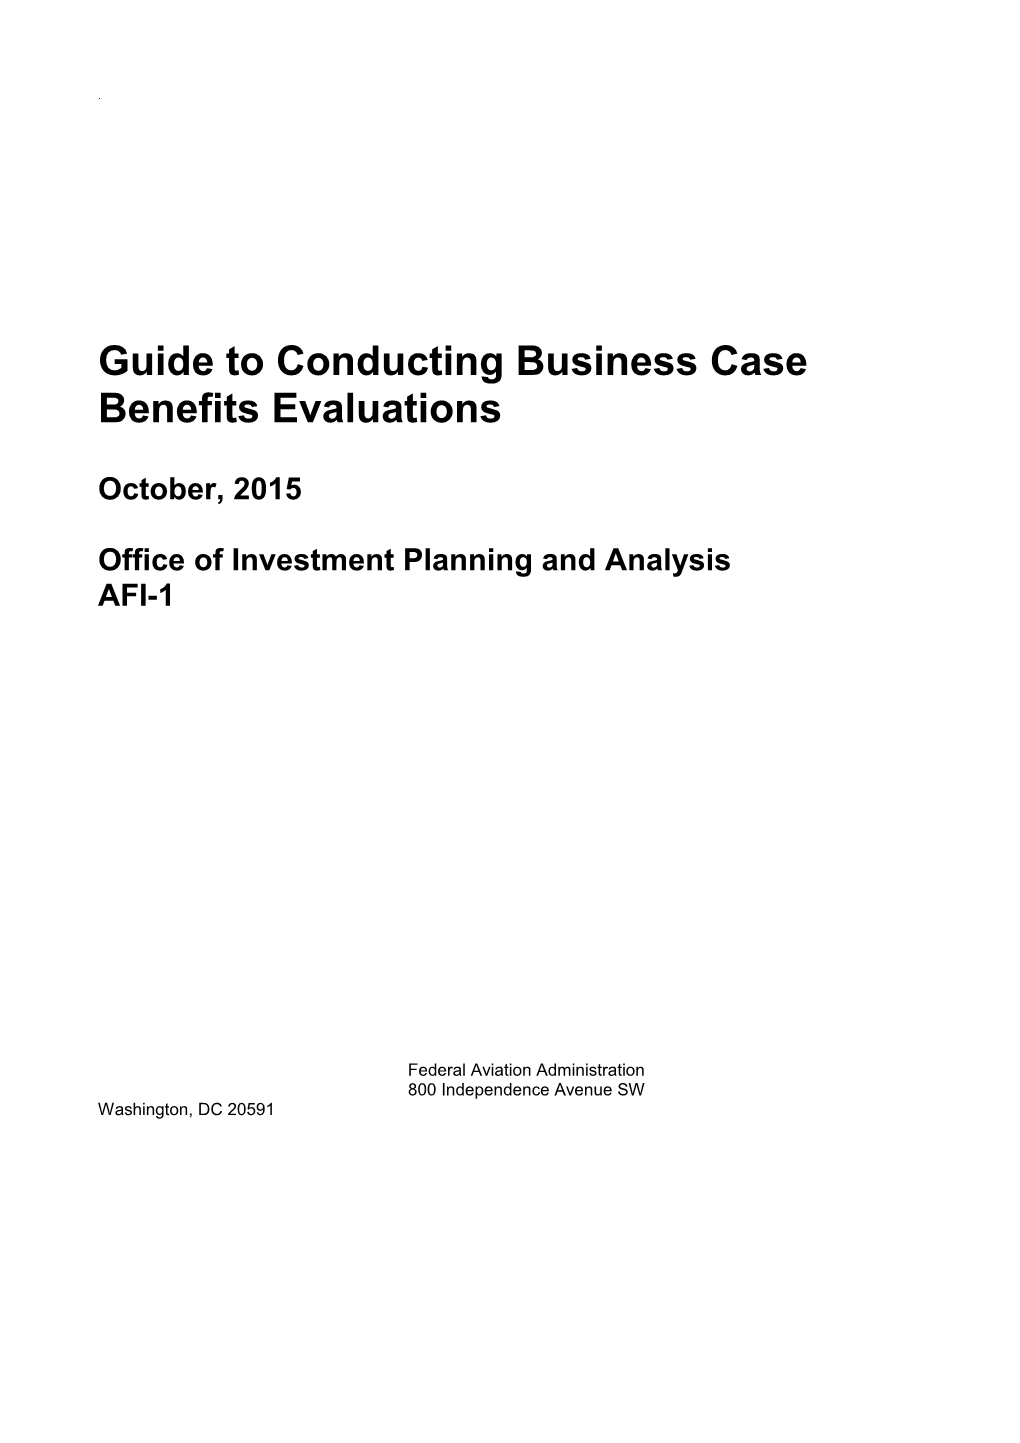 Investment Analysis Standards and Guidelines